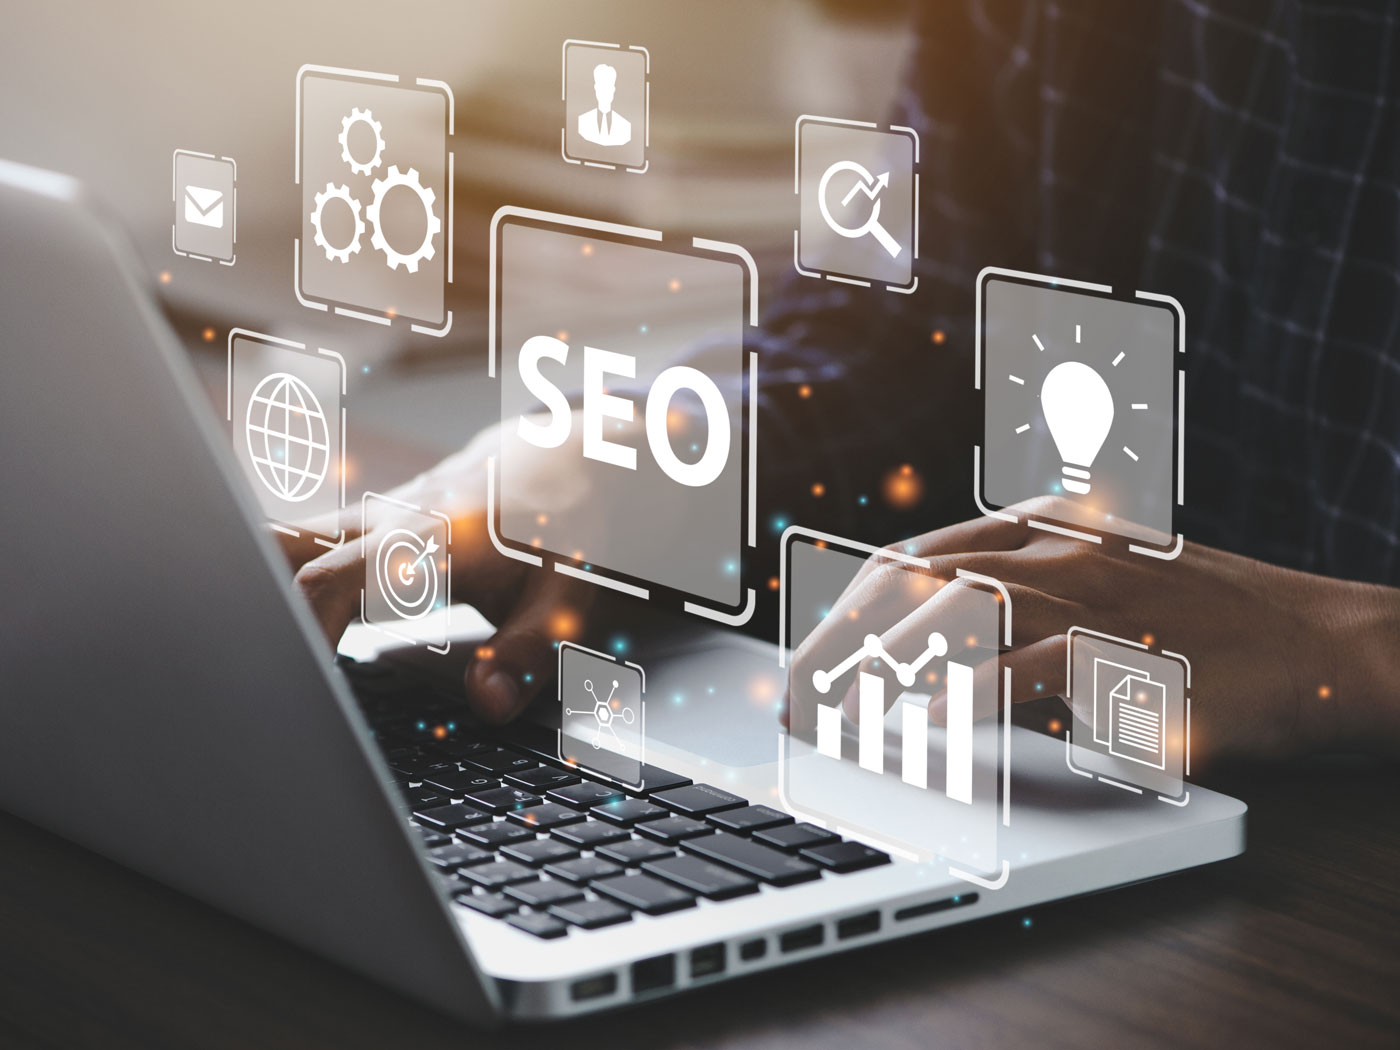 Why SEO (Search Engine Optimization) Is Important For Your Business